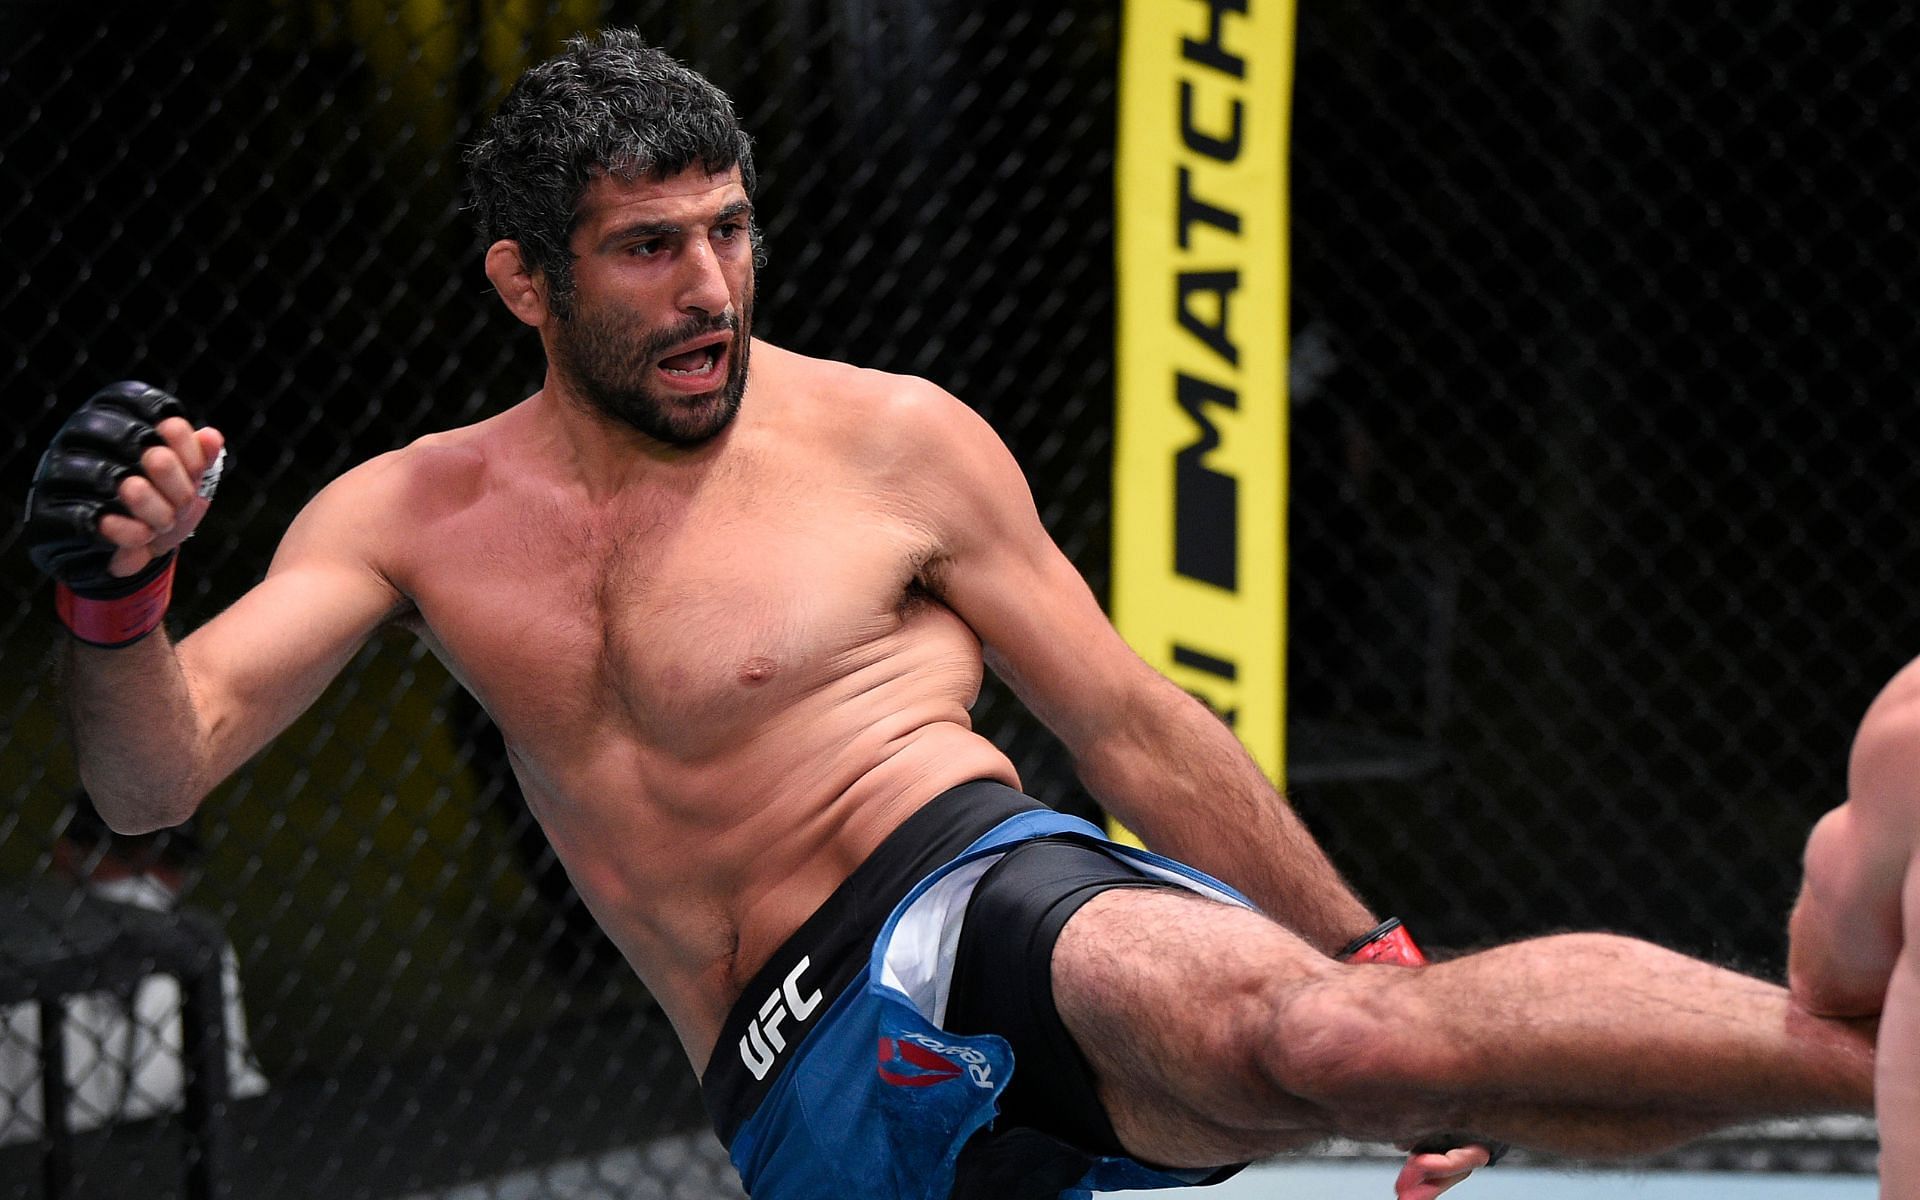 Beneil Dariush is heralded as one of the elite lightweight fighters in MMA today [Image courtesy: Getty Images]